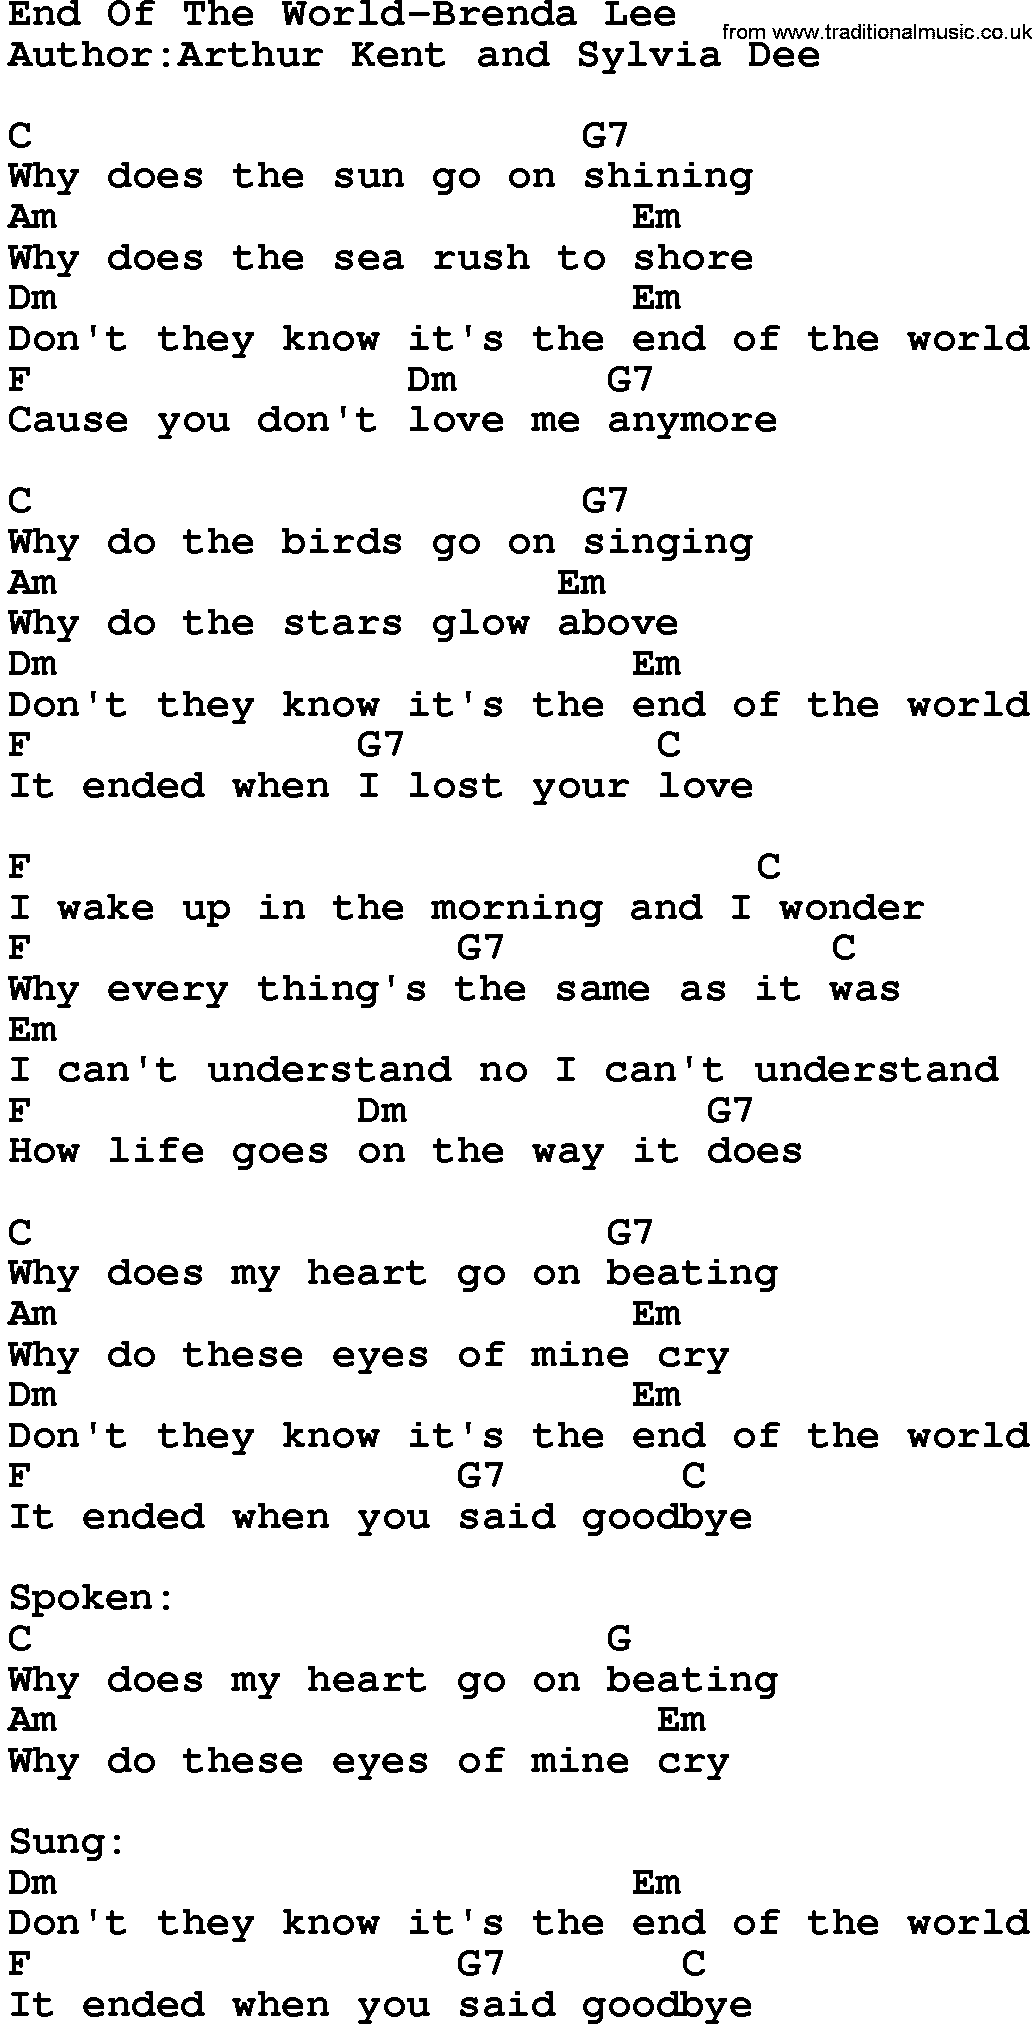 Country music song: End Of The World-Brenda Lee lyrics and chords